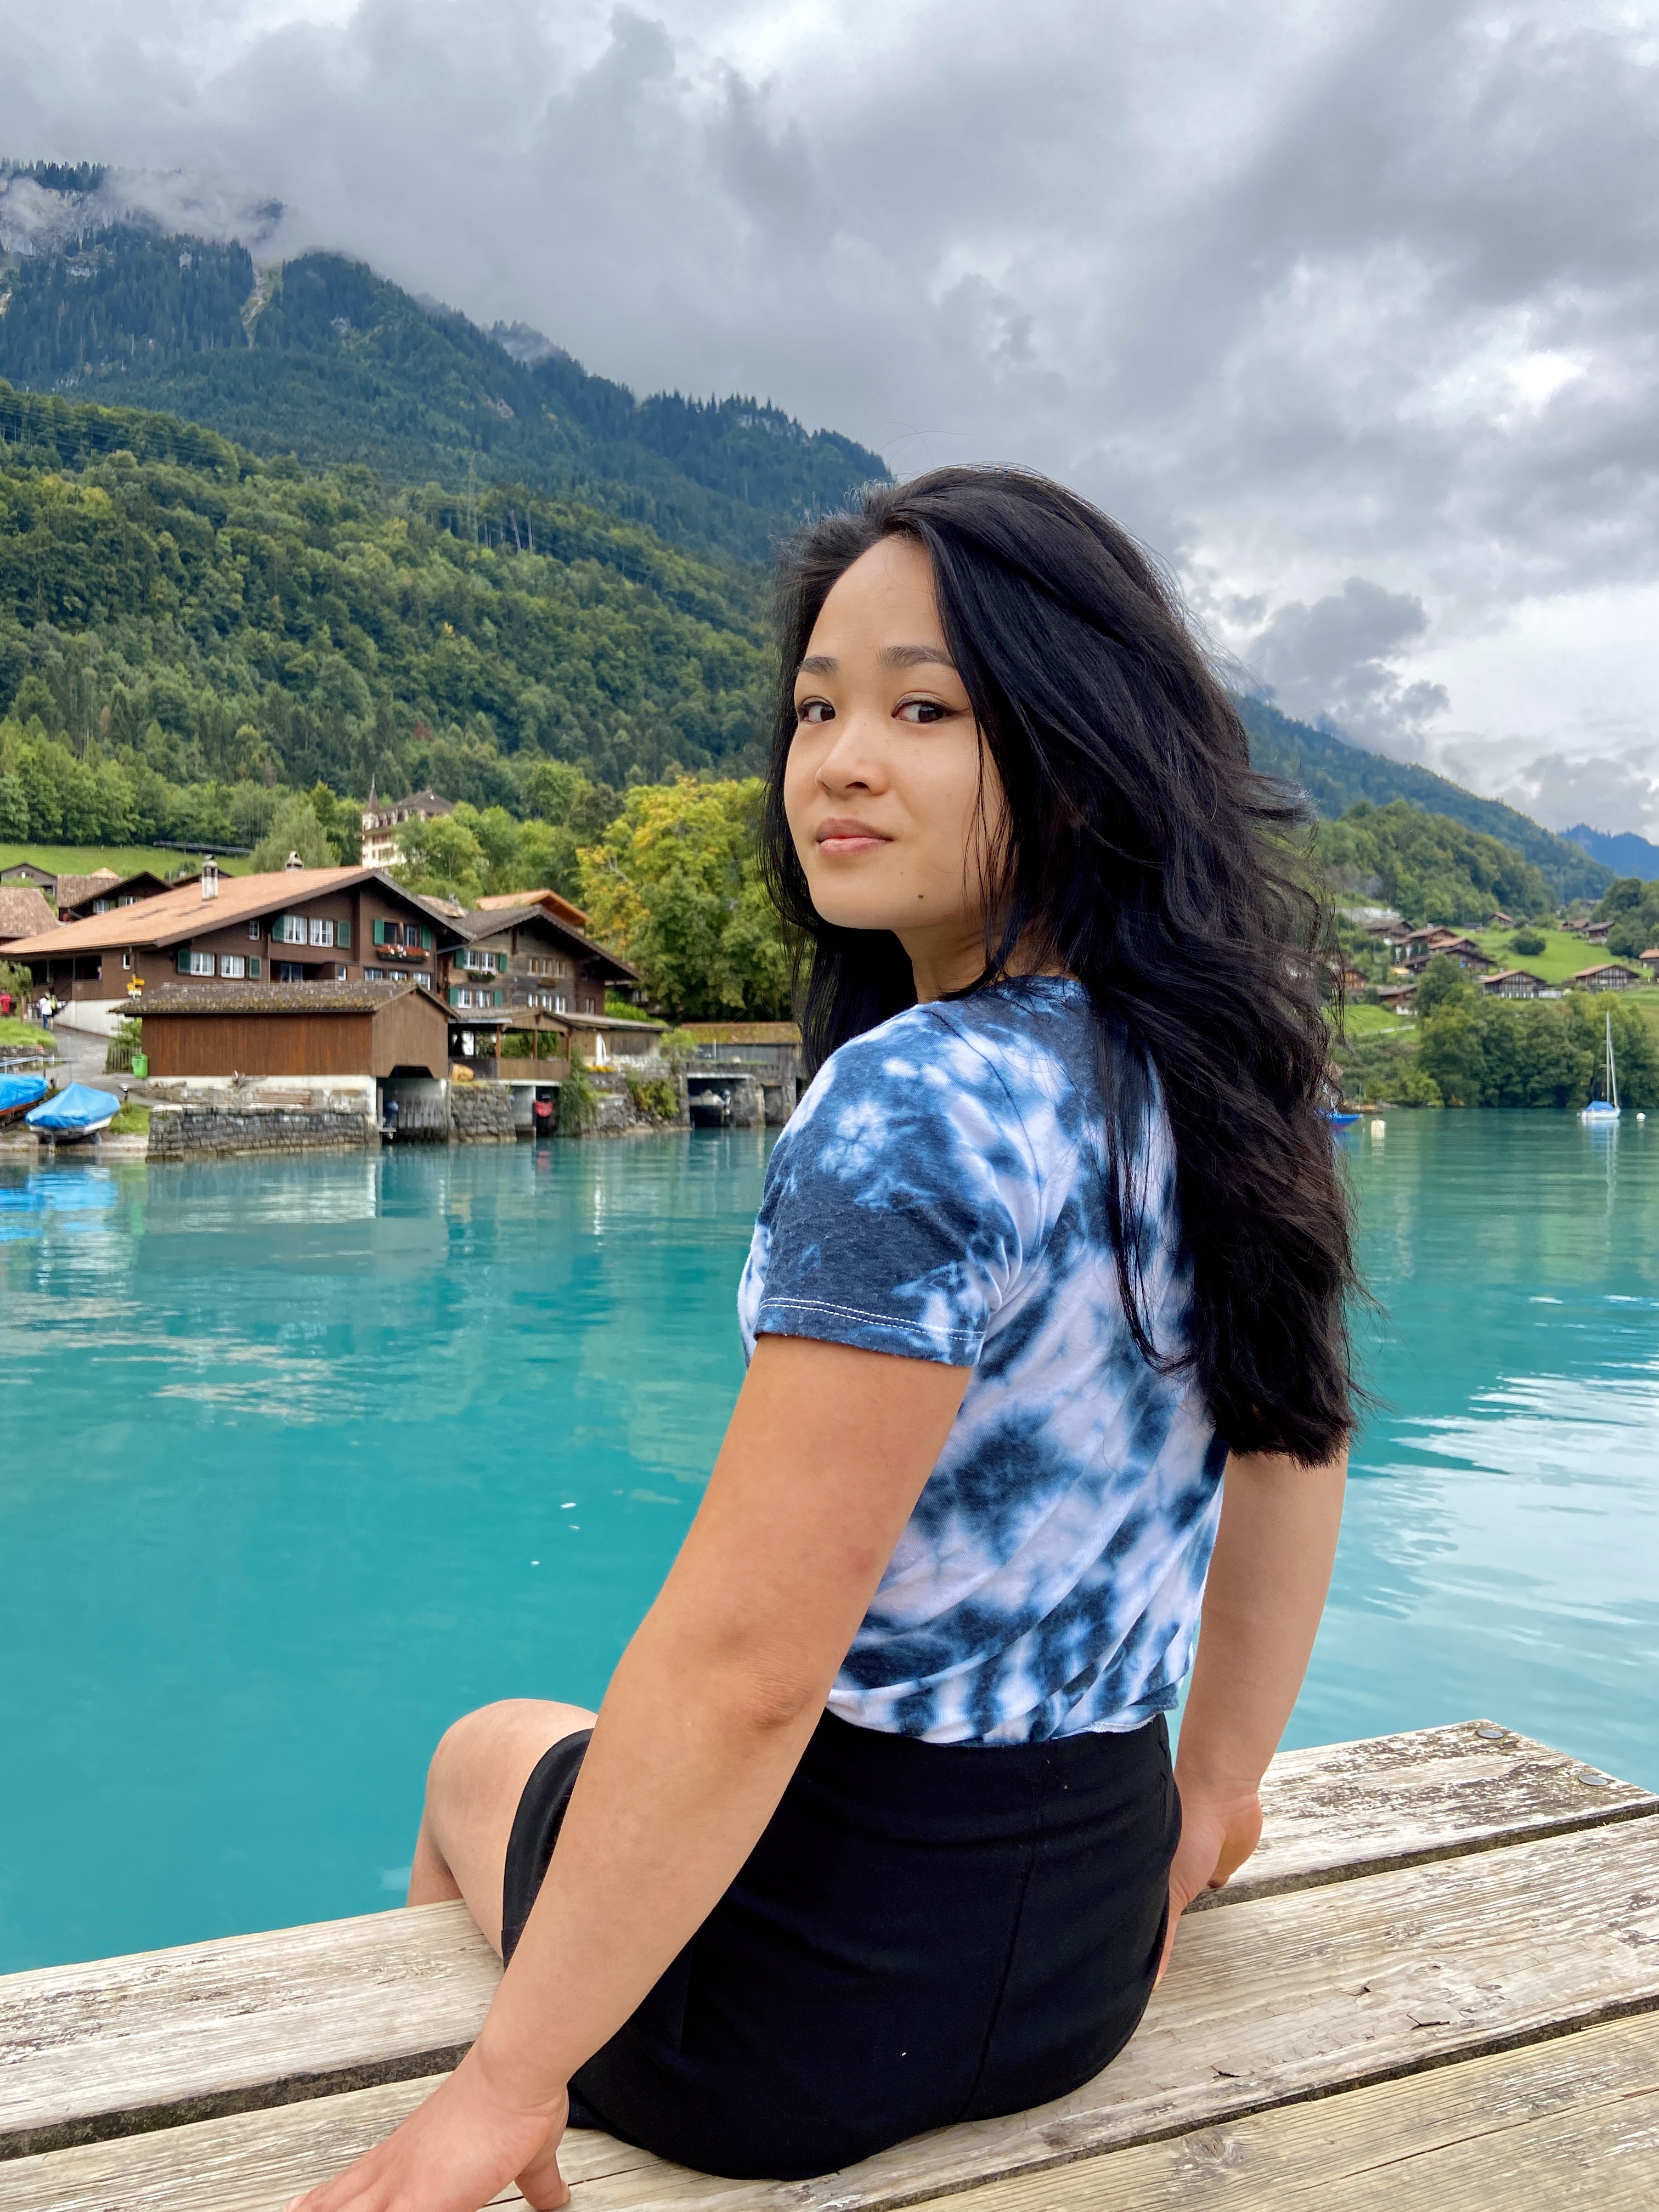 Xiangxia van den Ham, Dumpling Stories – young woman wearing a tie die t-shirt and a tight black skirt sitting by a turquois lake surrounded by wooden houses. 